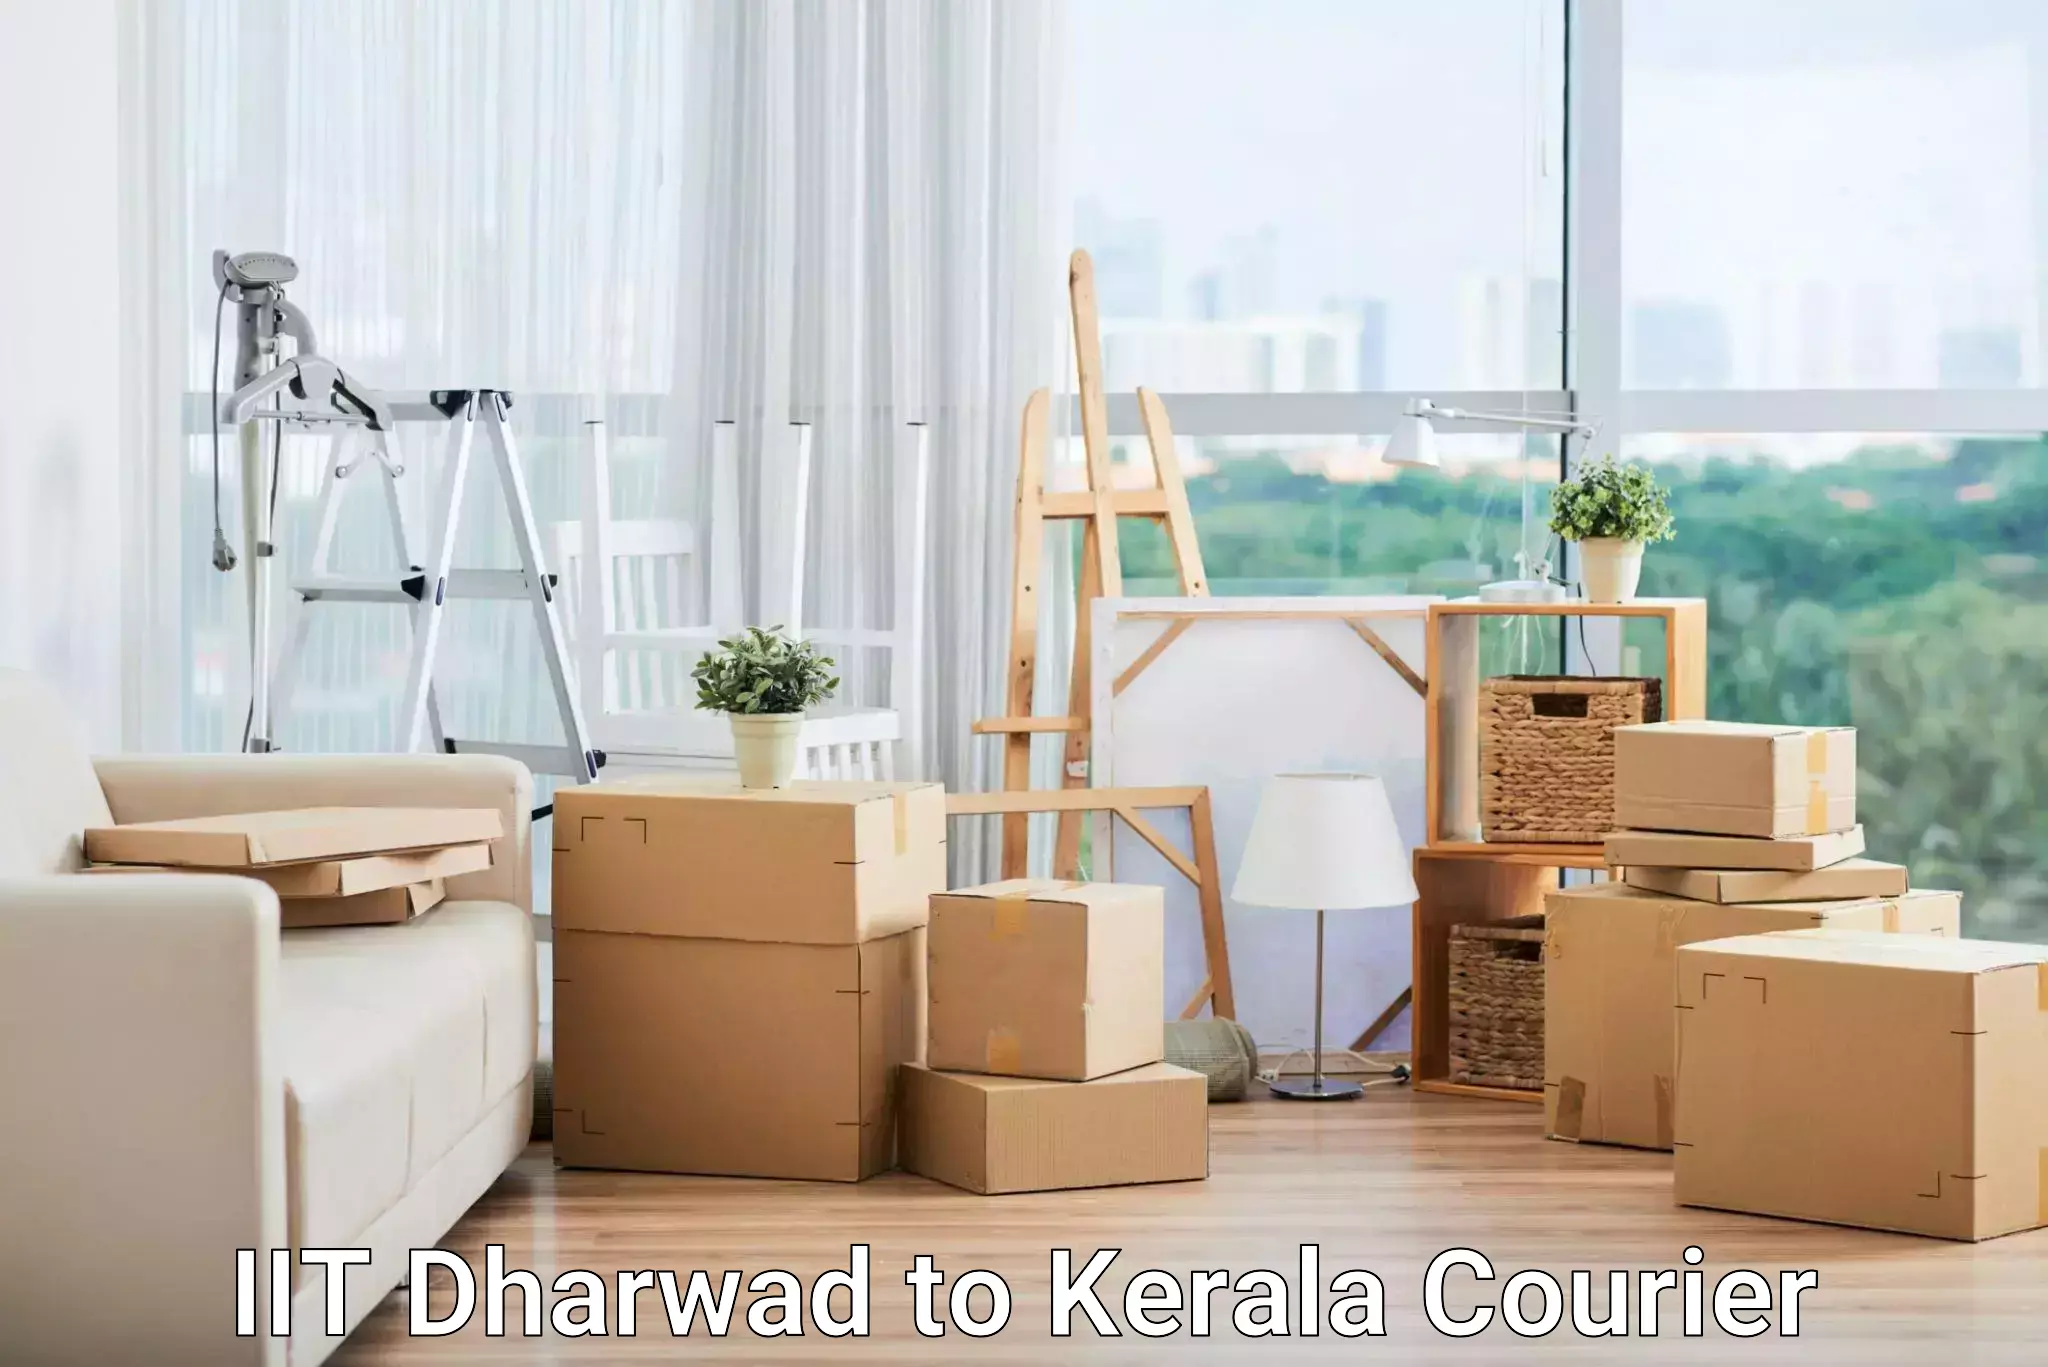 Reliable courier service IIT Dharwad to Kerala